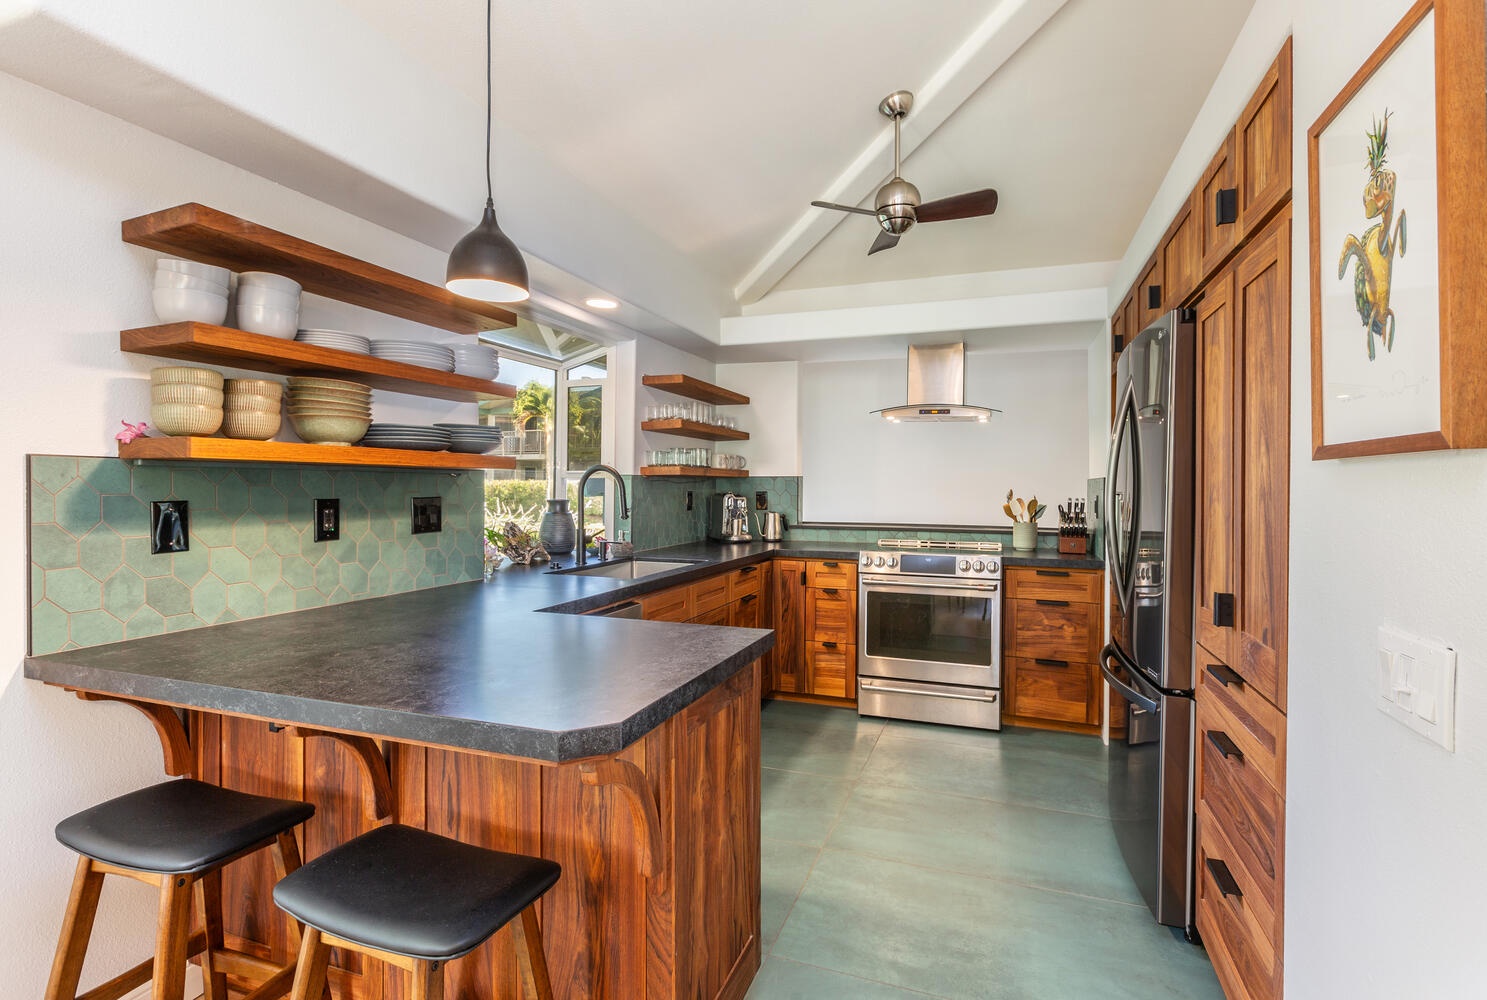 Princeville Vacation Rentals, Sea Glass - The kitchen, the heart of the home, is equipped with wide counter spaces and top of the line appliances.